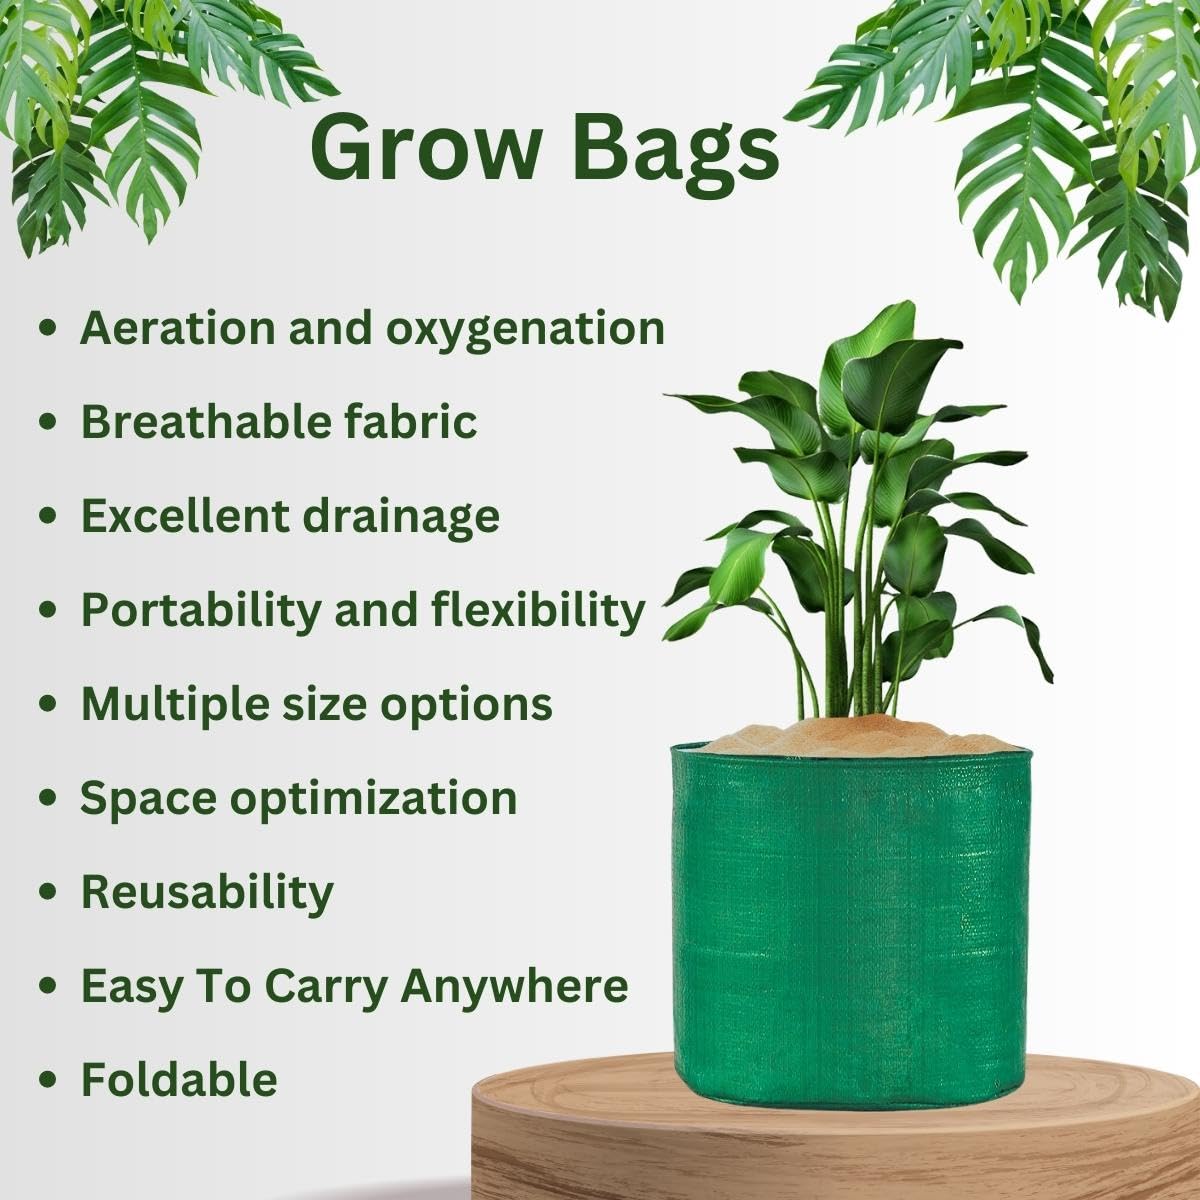 SINGHAL HDPE UV Protected Round Plants Grow Bags Combo, 9x12,15x9,24x9 Inch - Each 1 Bag (Pack of 3 Bags) for Terrace and Vegetable Gardening